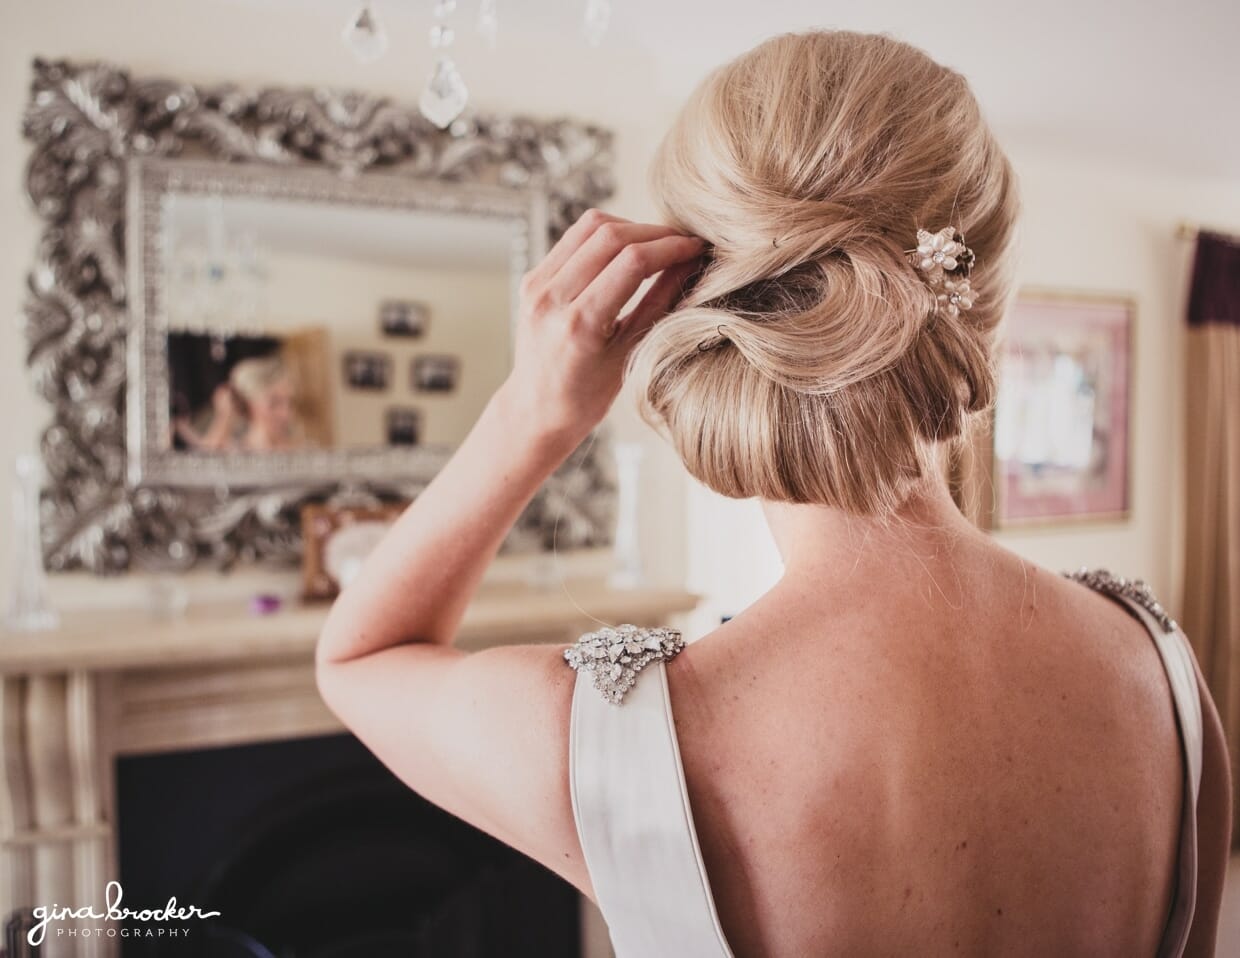 The bride adjust her simple and classic updo on the morning of her garden wedding